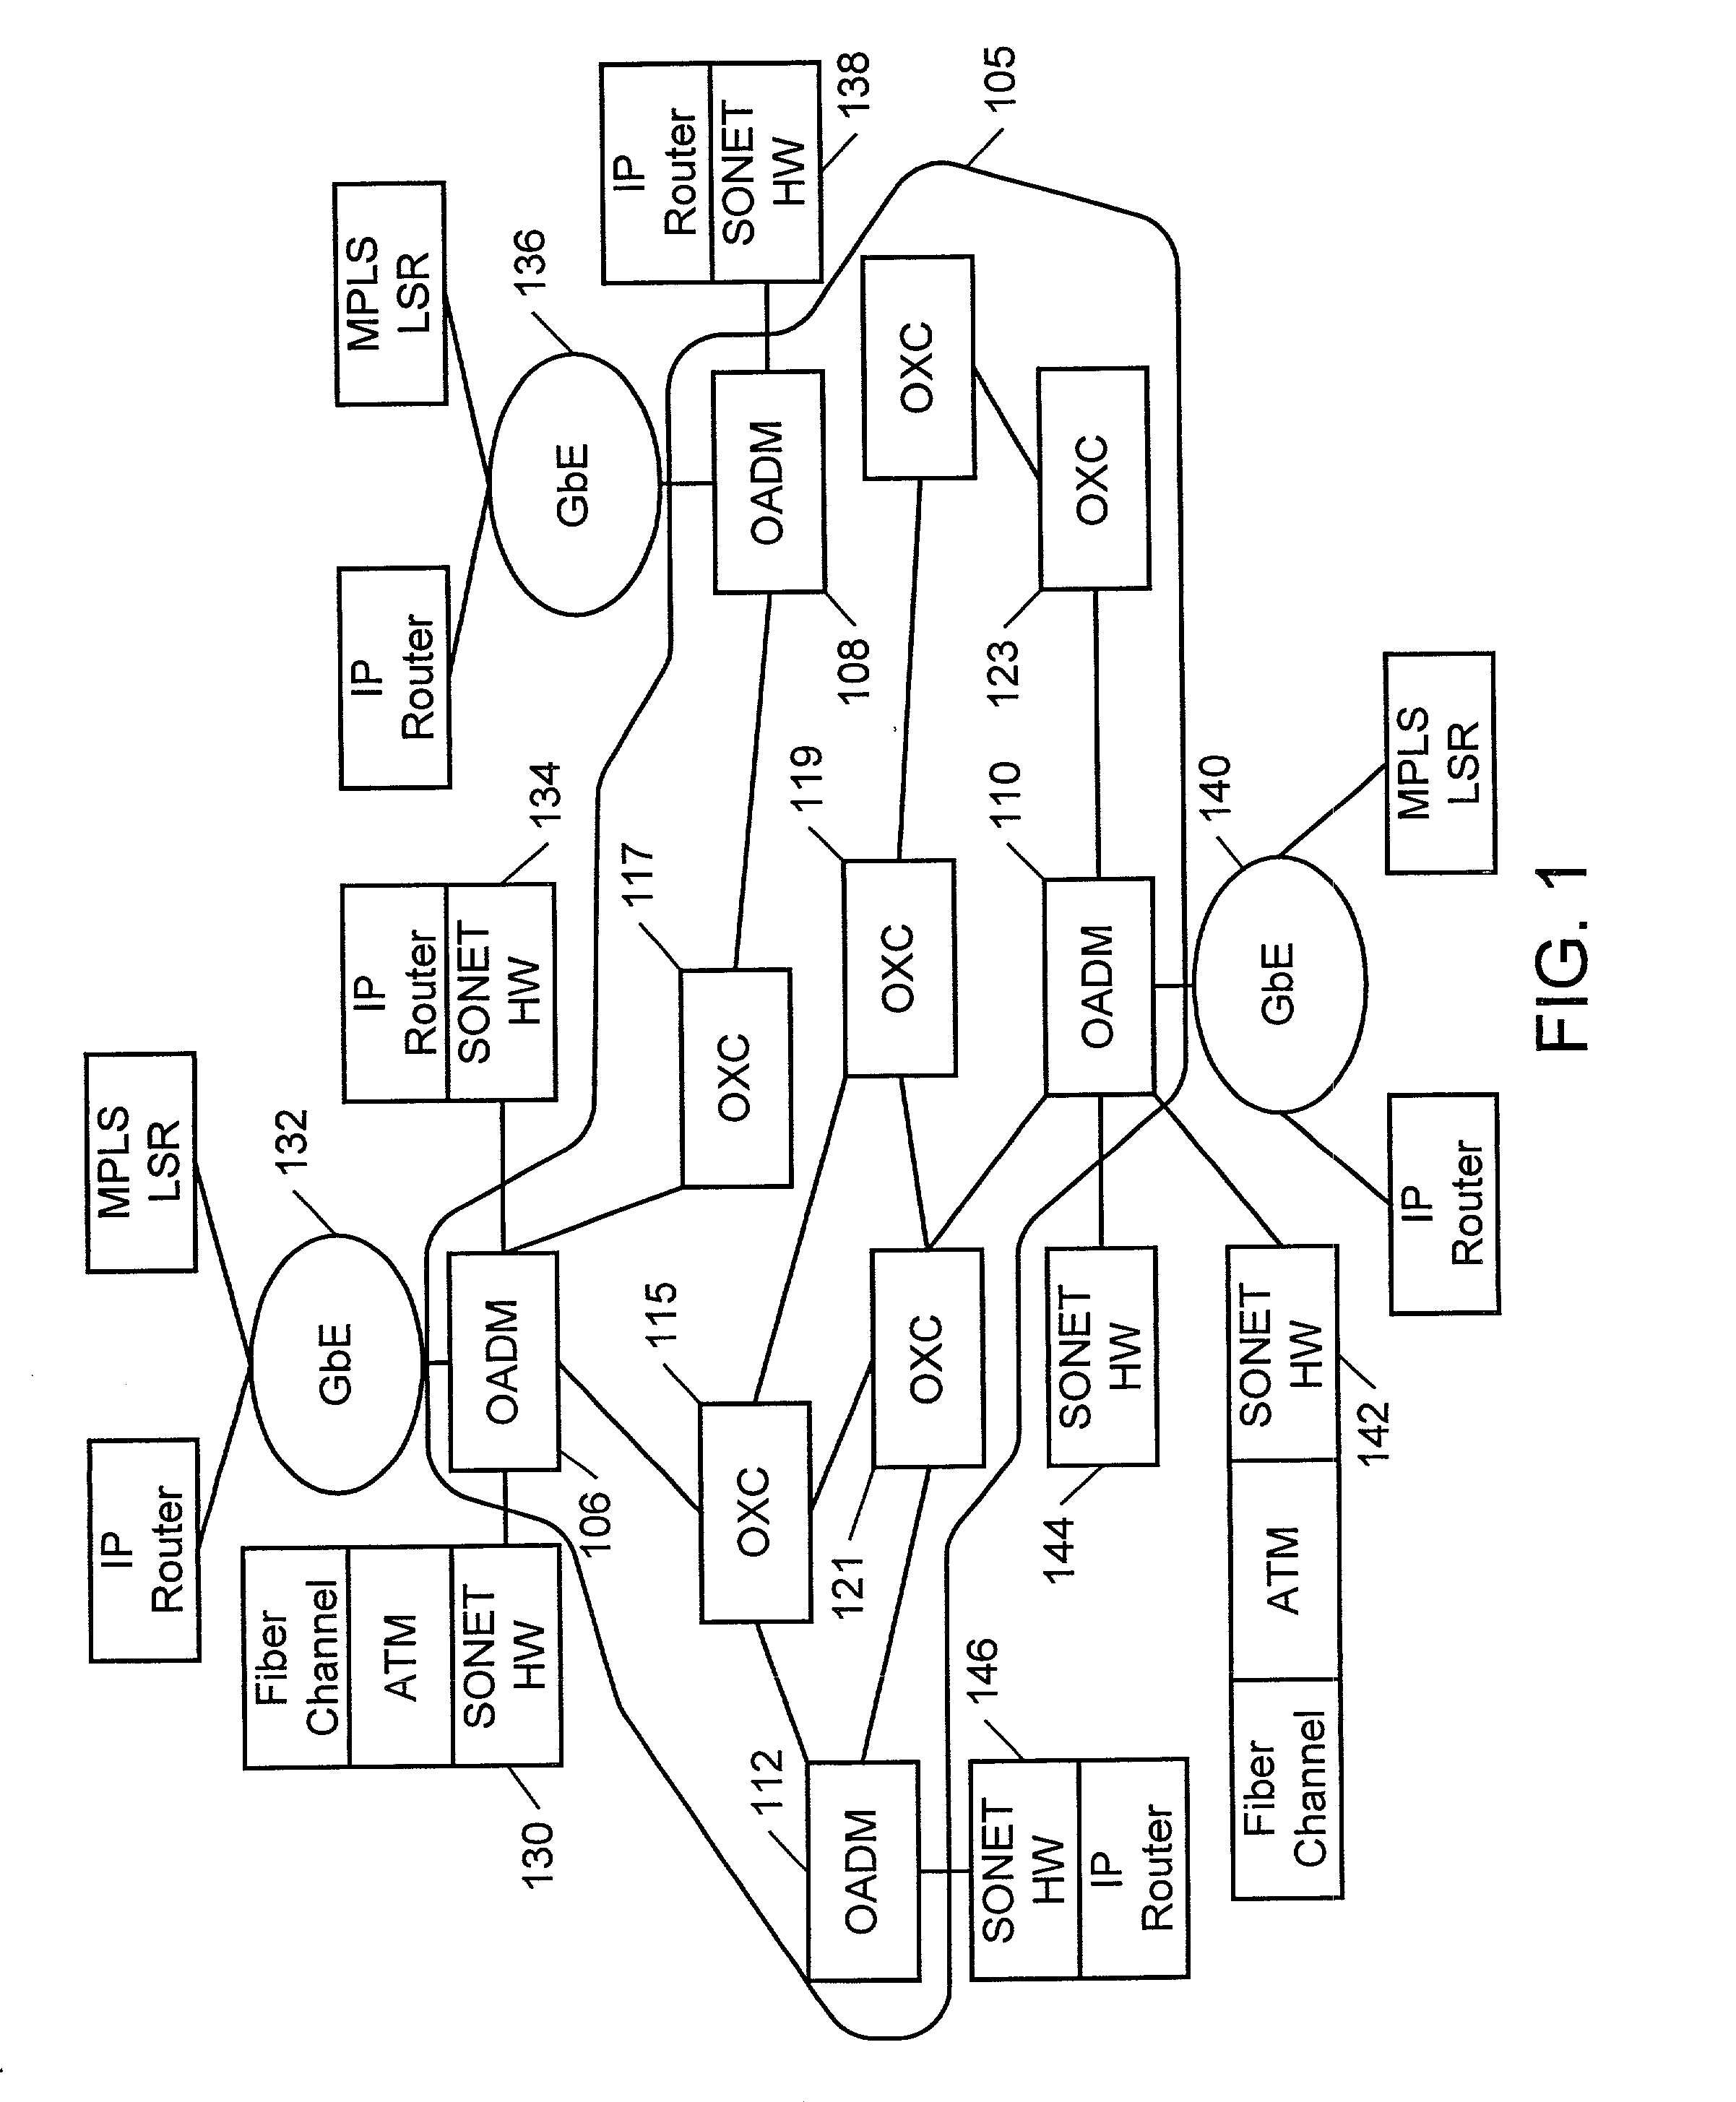 Self-healing hierarchical network management system, and methods and apparatus therefor